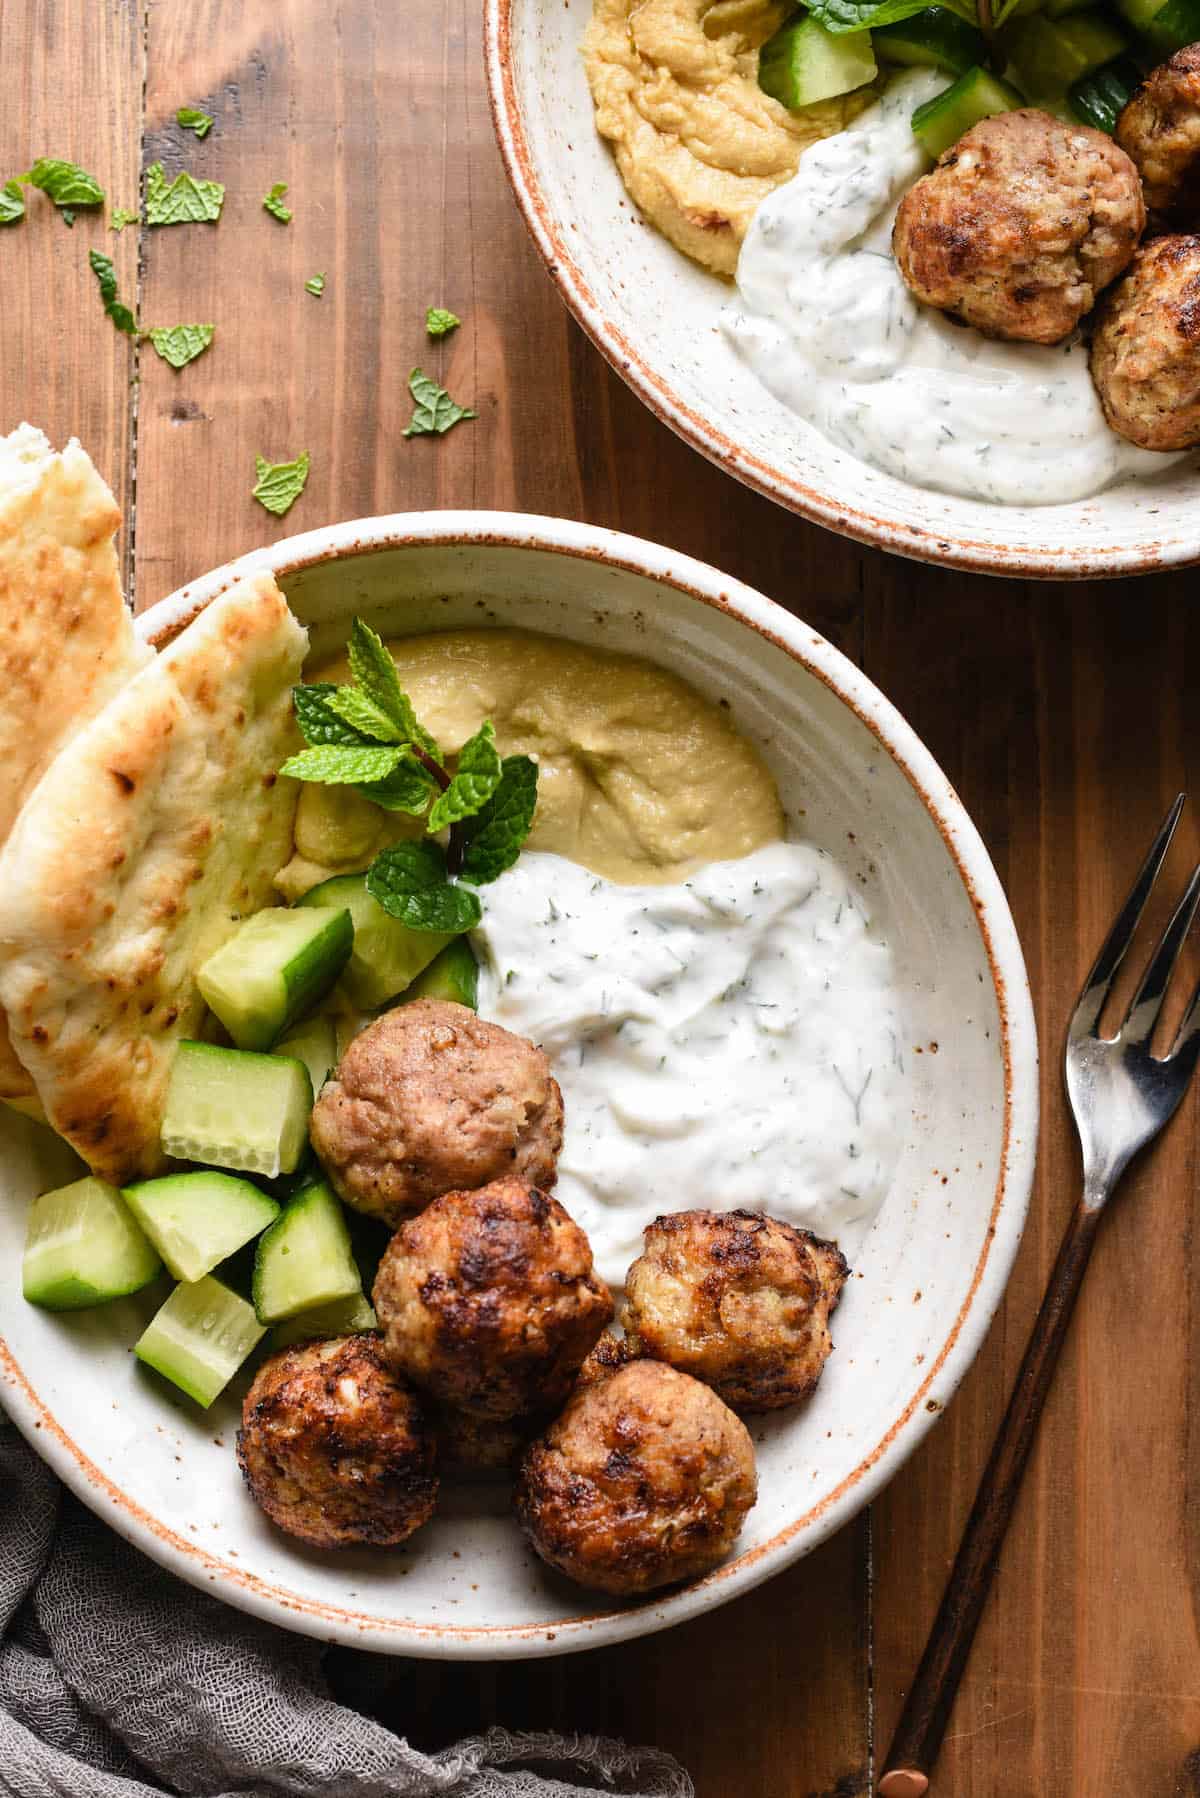 Two bowls filled with turkey meatballs in air fryer, diced cucumbers, herbed yogurt sauce, hummus and naan bread.